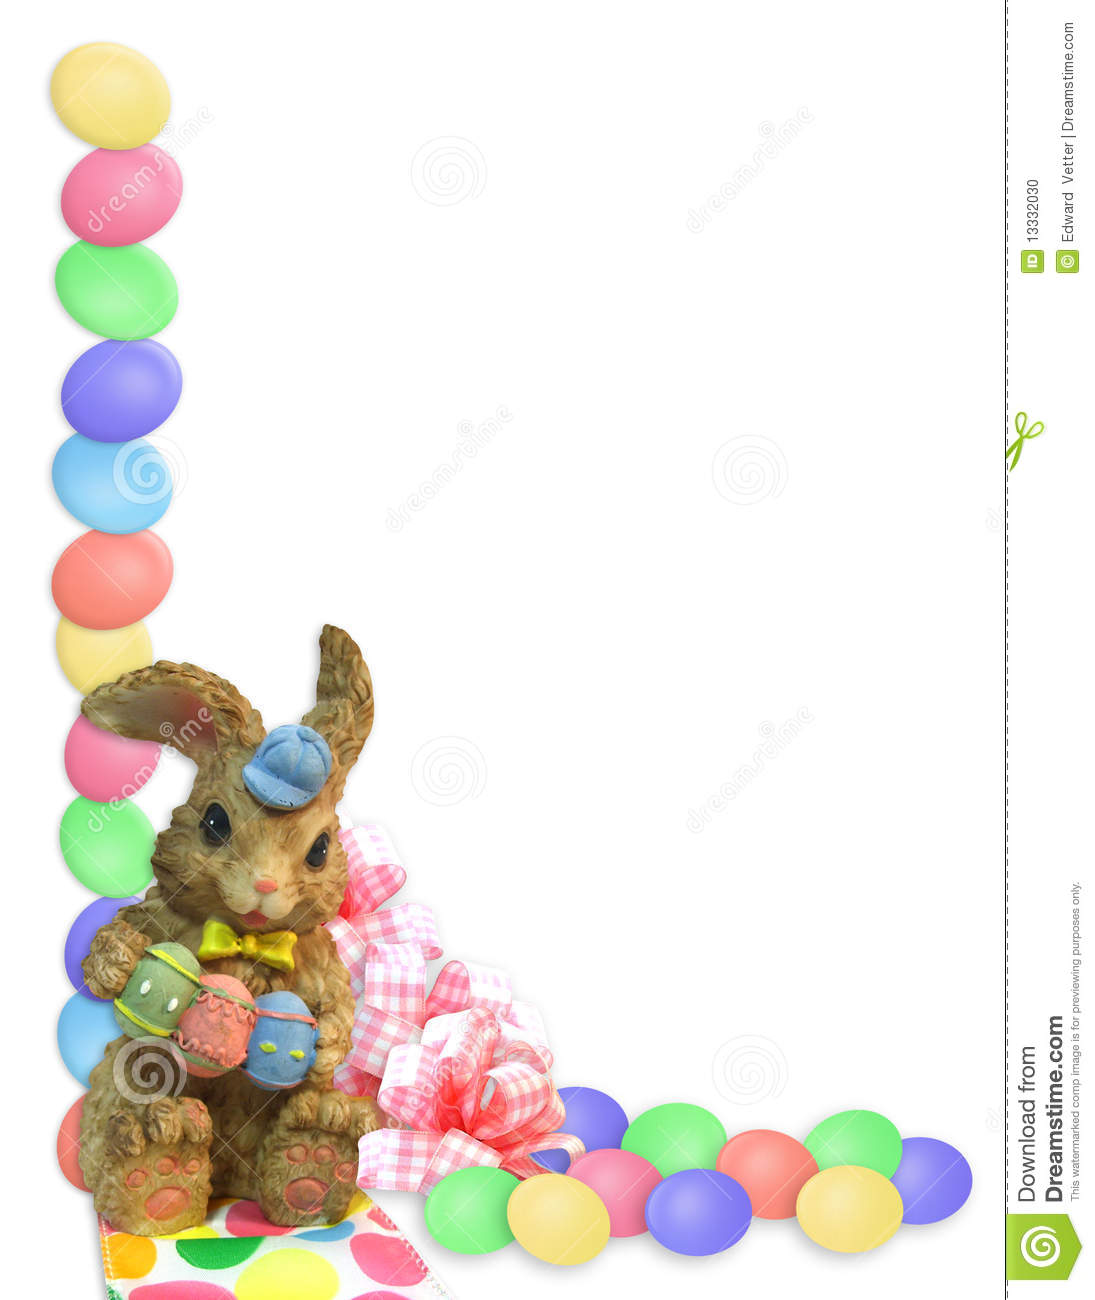 Image And Illustration Composition Easter Eggs Border For Greeting